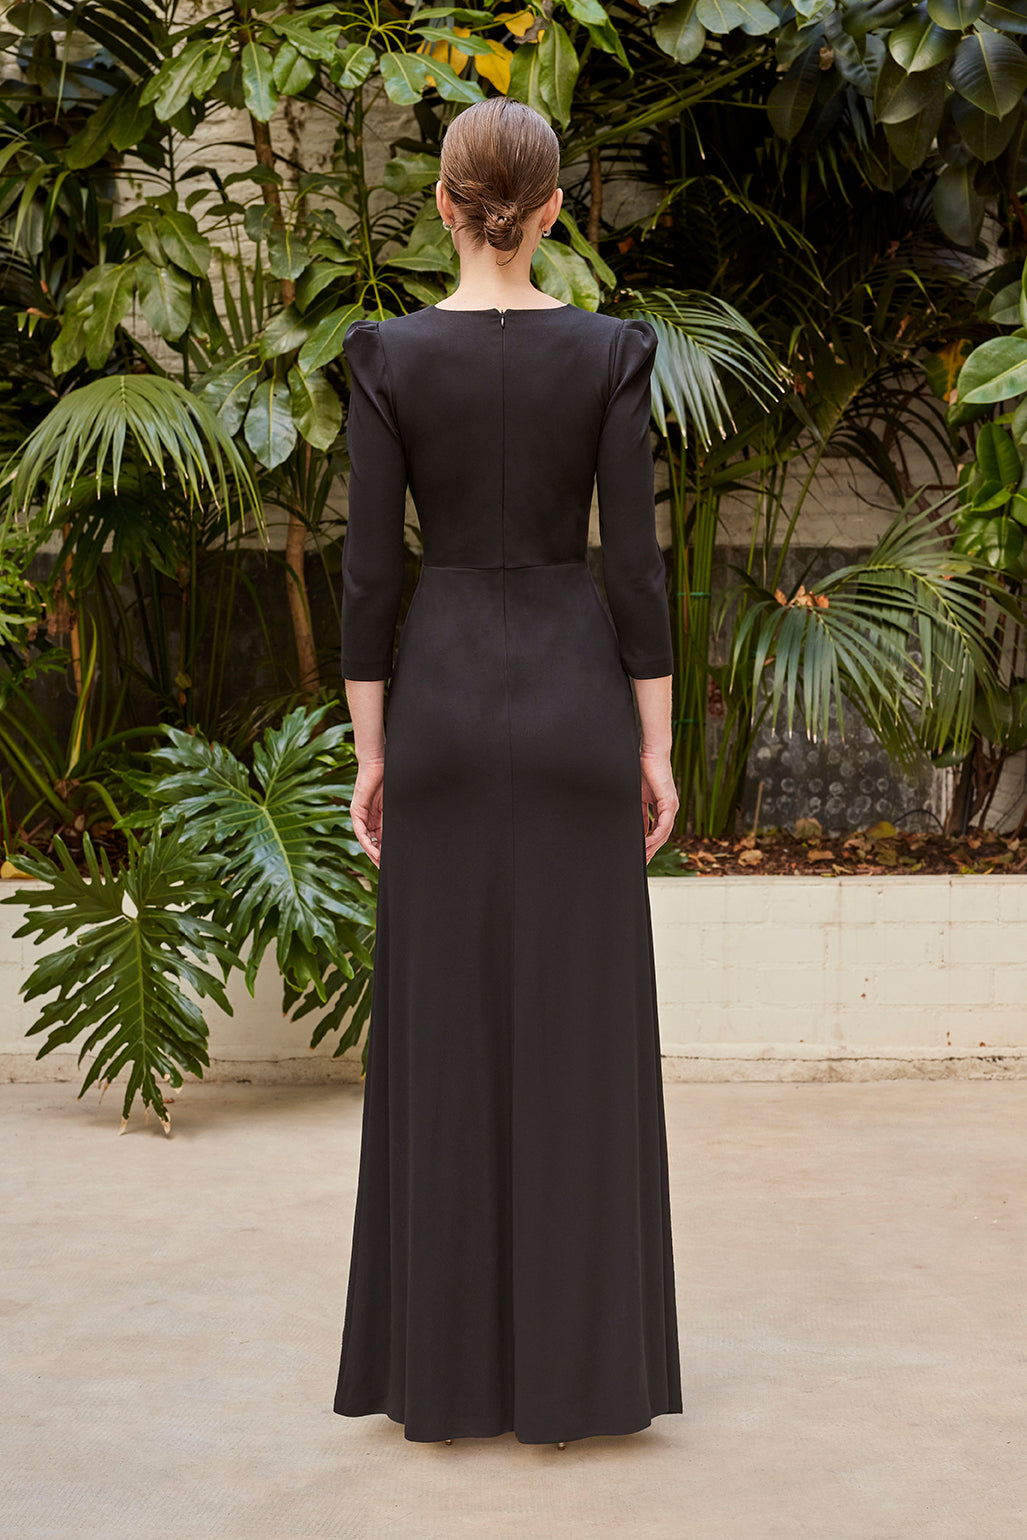 Back view of the elegant evening gown, highlighting the seamless zipper closure and the continuation of the sleek black fabric to the floor.